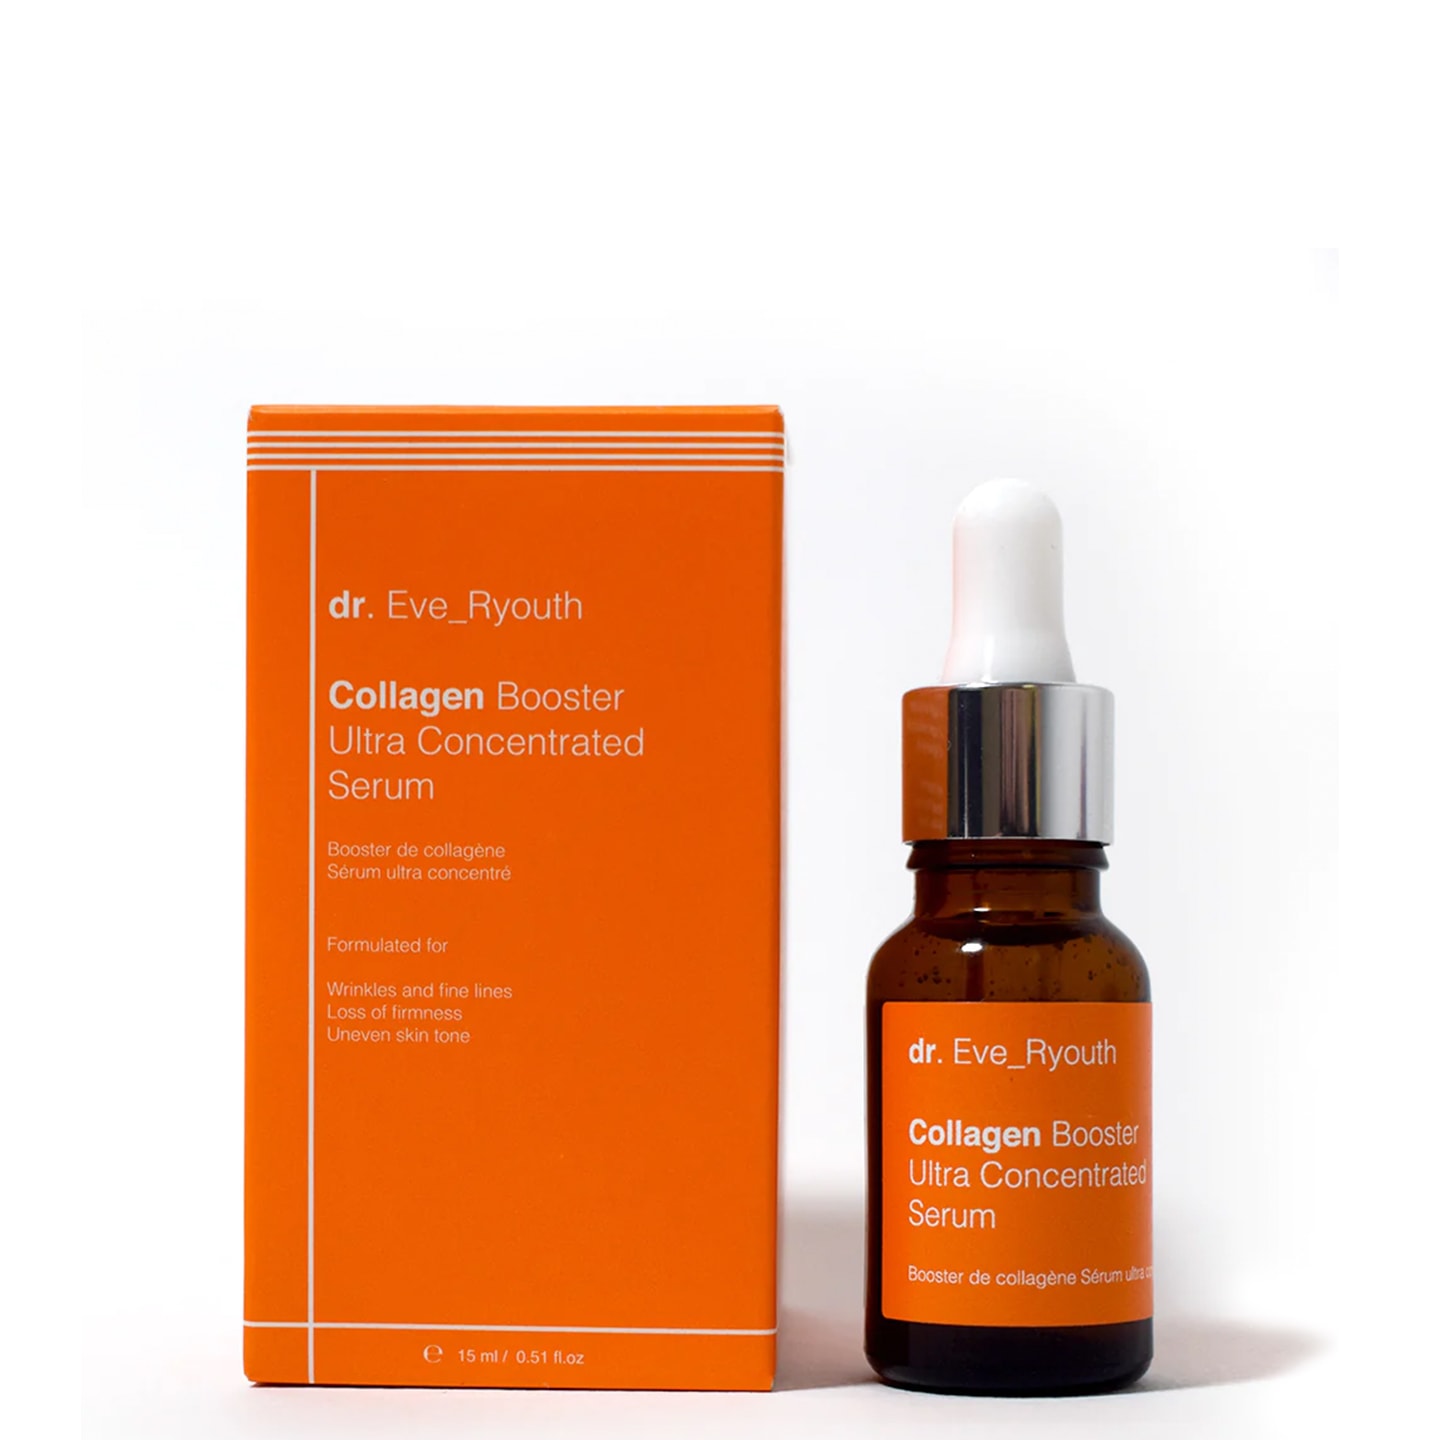 dr. Eve_Ryouth Collagen Booster Ultra Concentrated Serum (1 av 3)